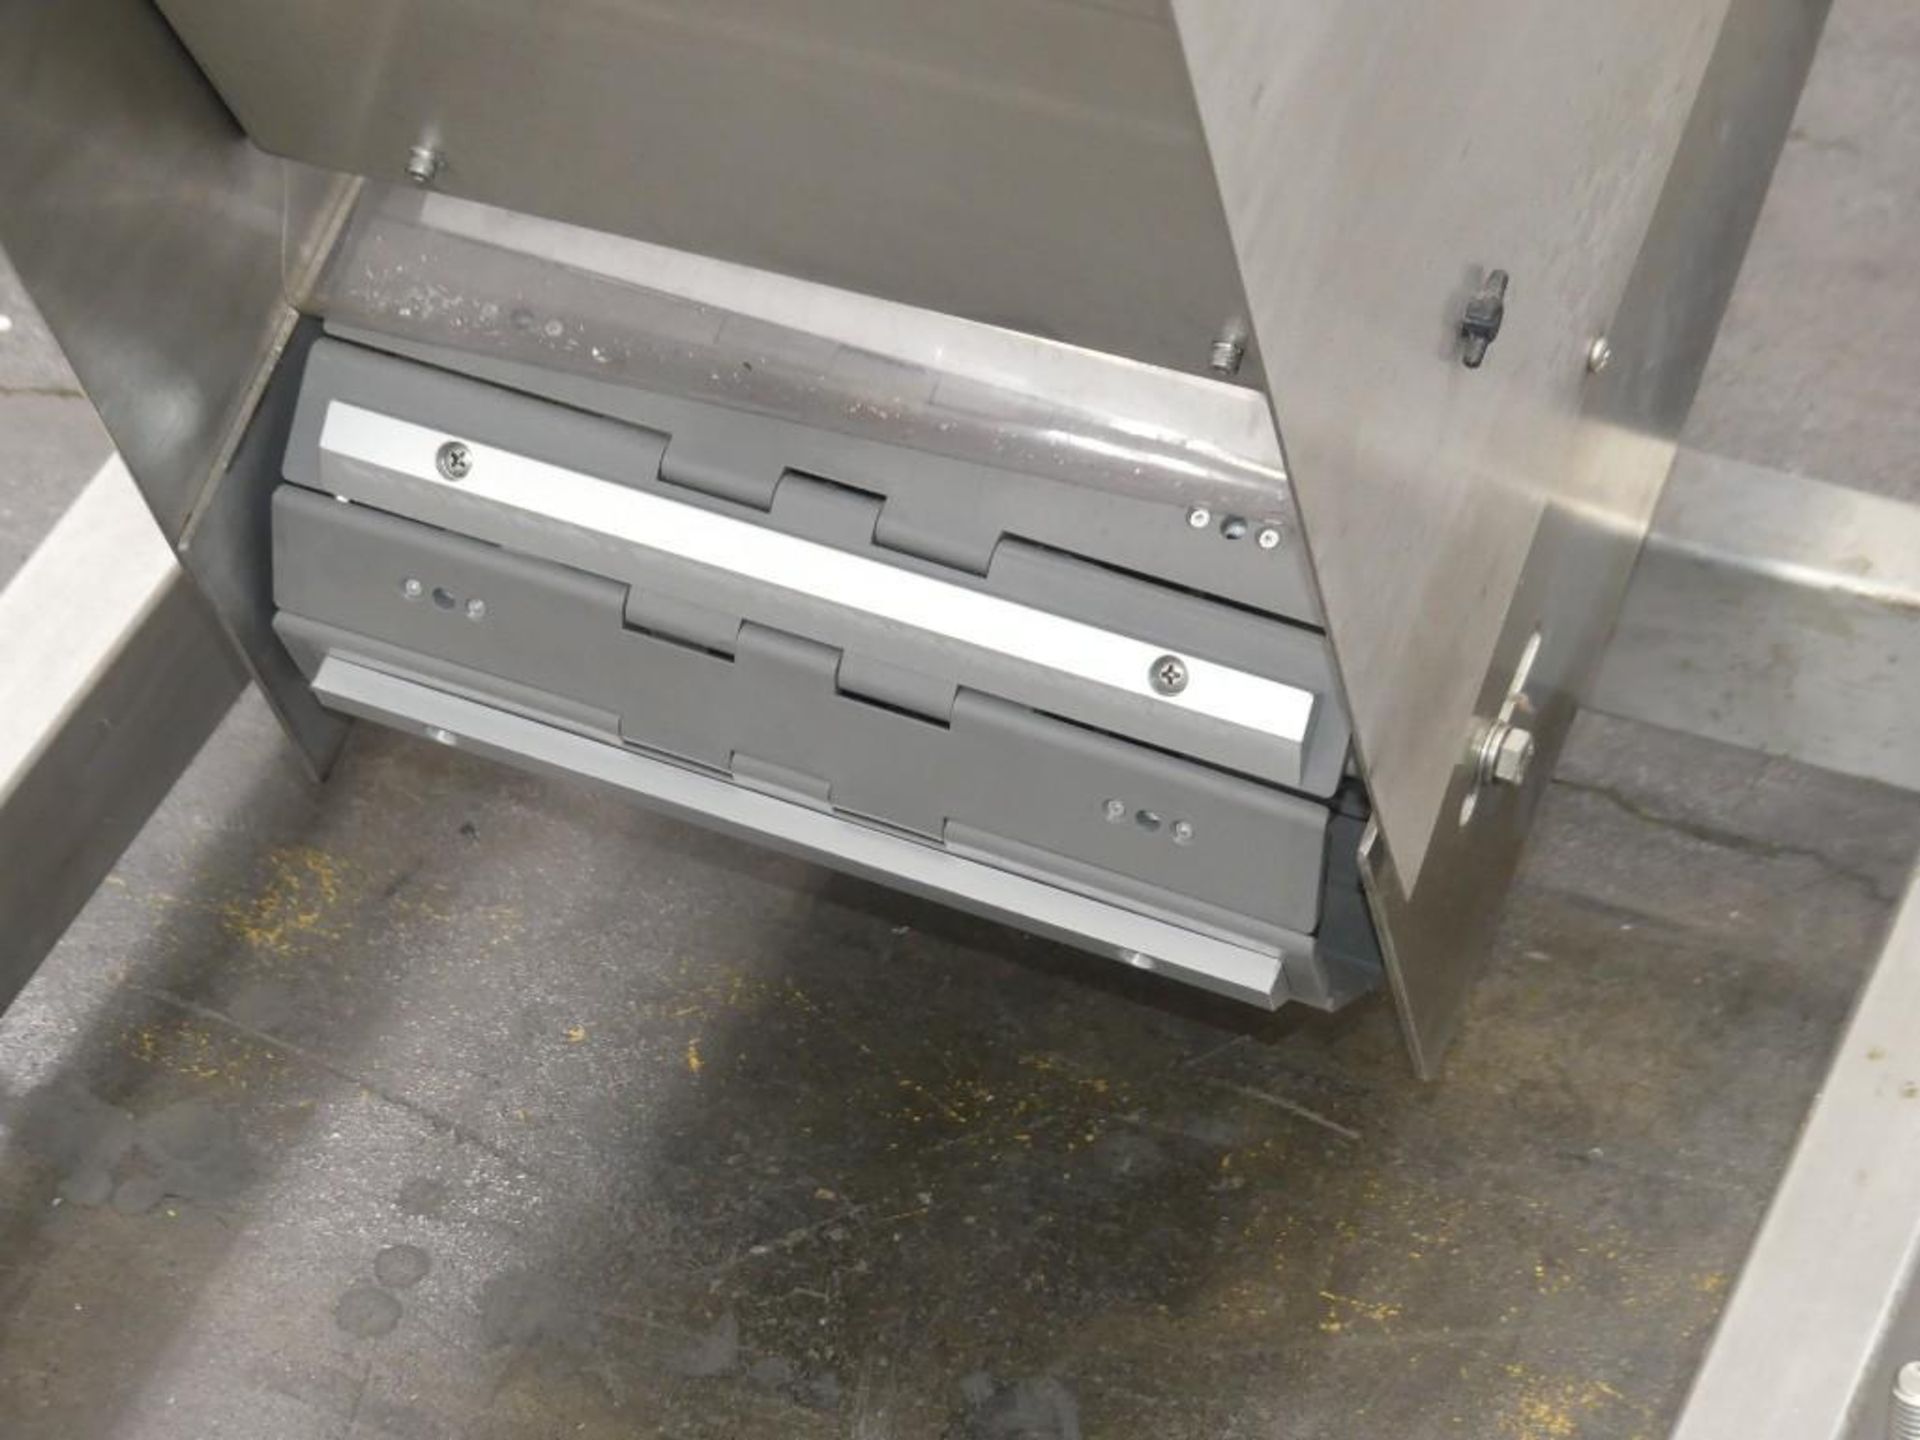 2019 AccuTek Packaging Equipment Co. 50-C0E-CH2 Stainless Steel Cap Loader Elevator - Image 8 of 25